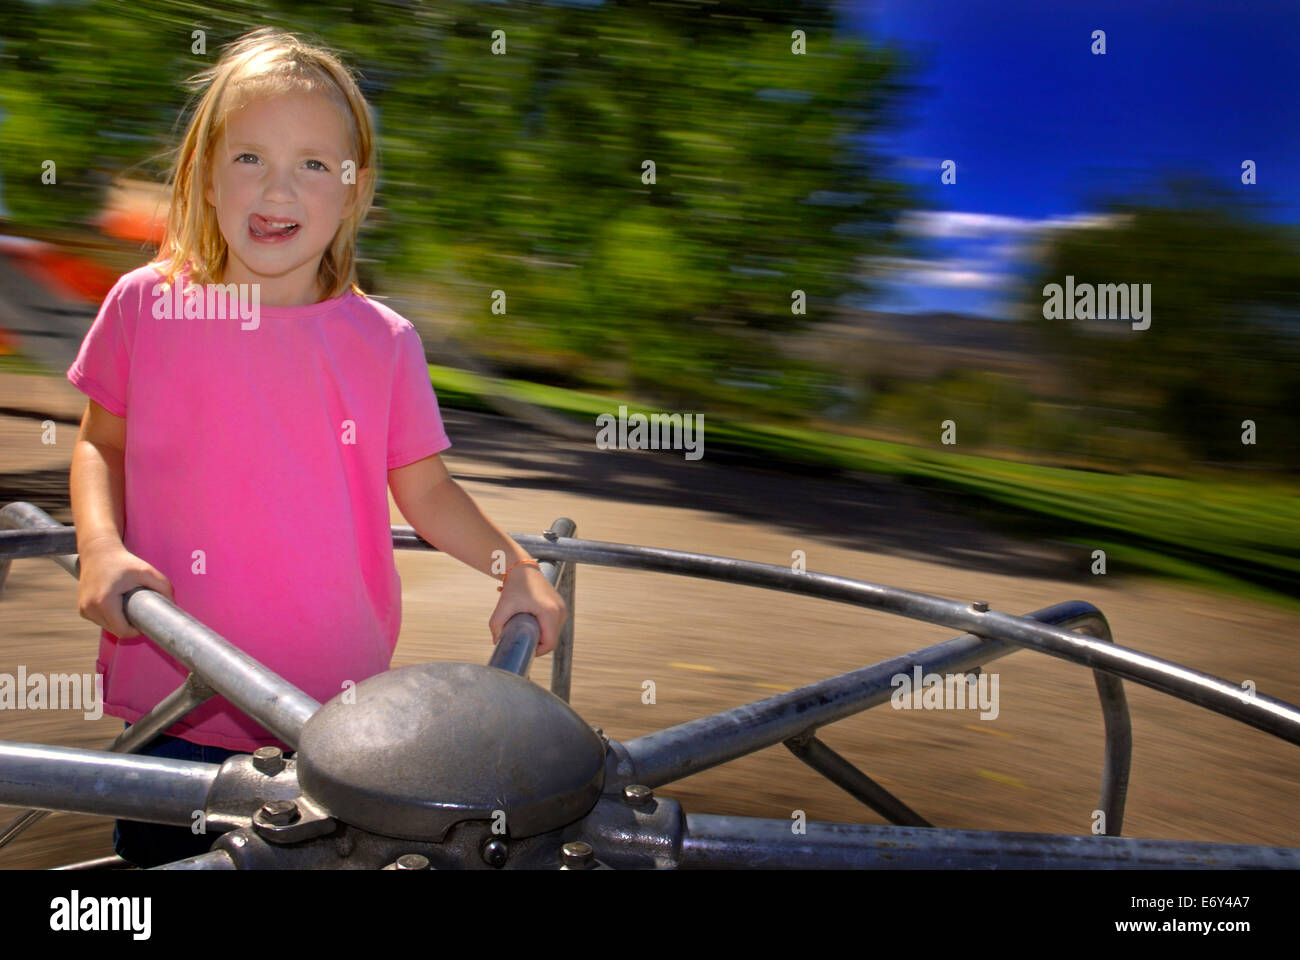 Little girl playing on merri-go-round at a park Stock Photo